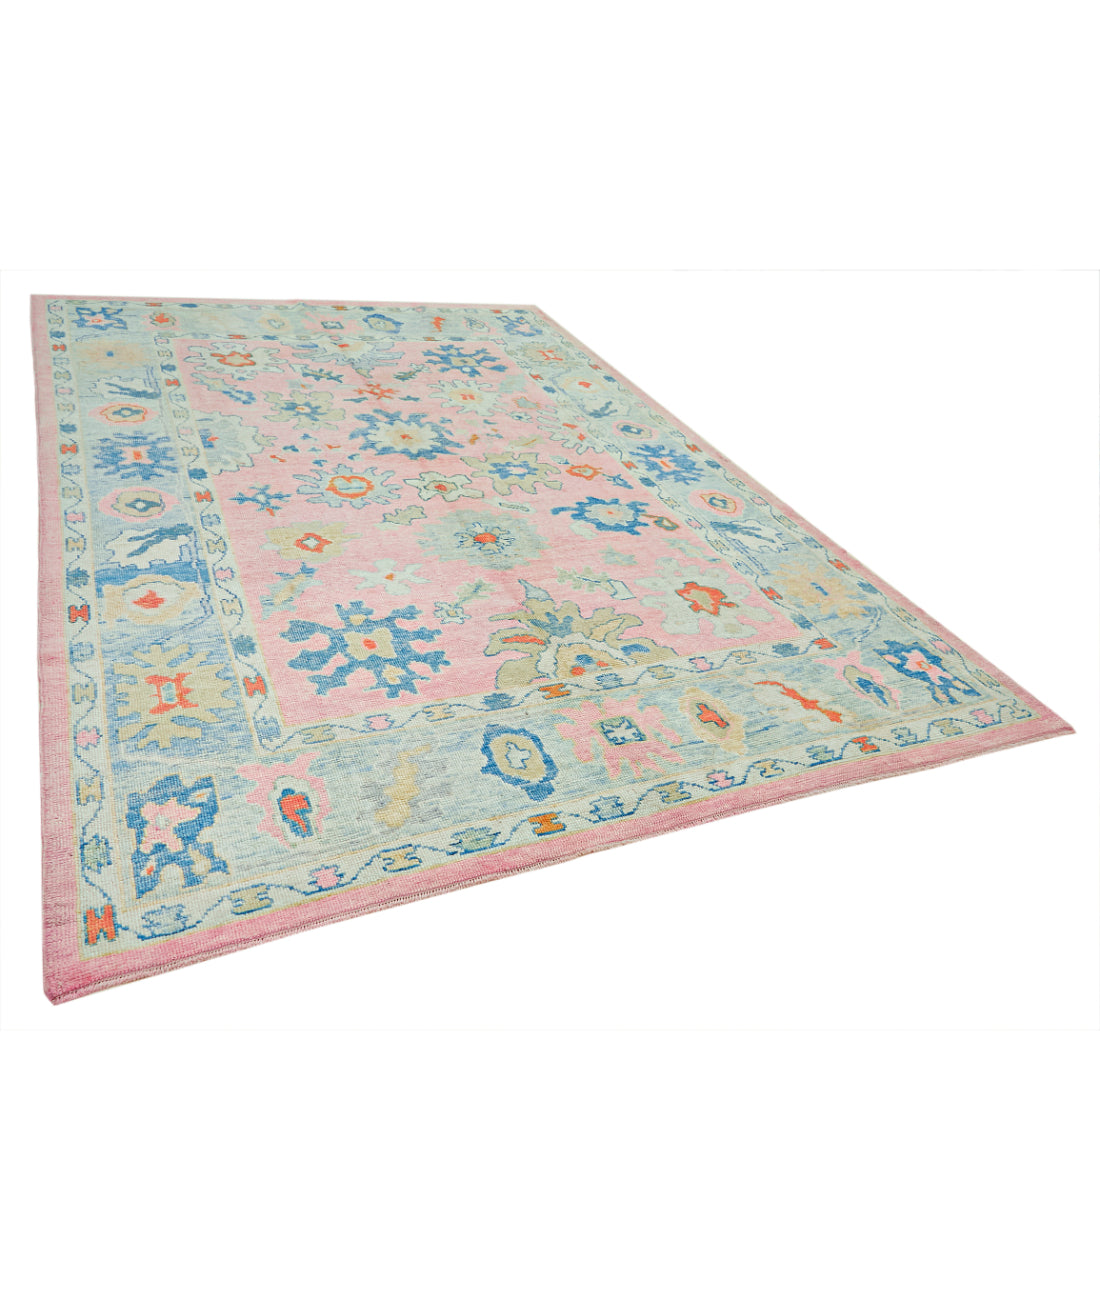 Hand Knotted Turkey Oushak Wool Rug 7'11" x 11'4" 7' 11" X 11' 4" (241 X 345) / Pink / Grey